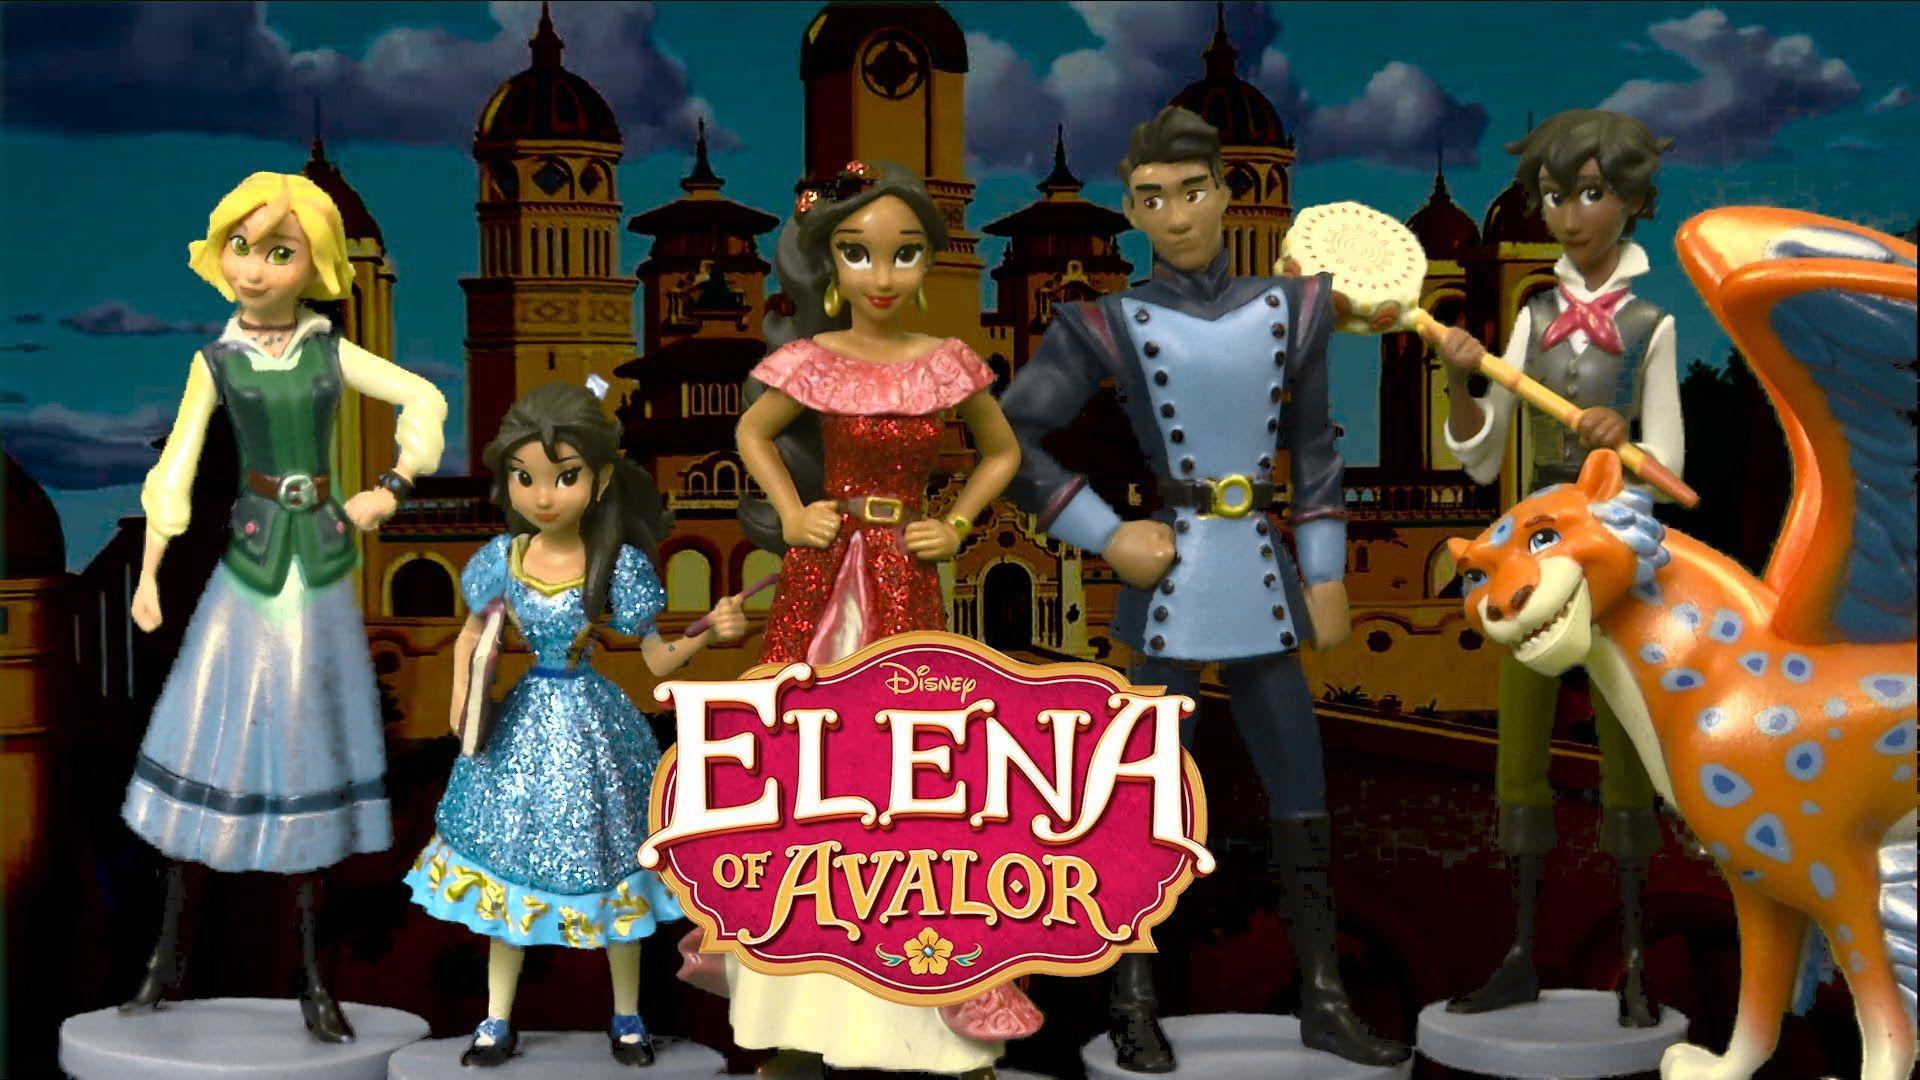 Elena of Avalor Figurine Playset from The Disney Store